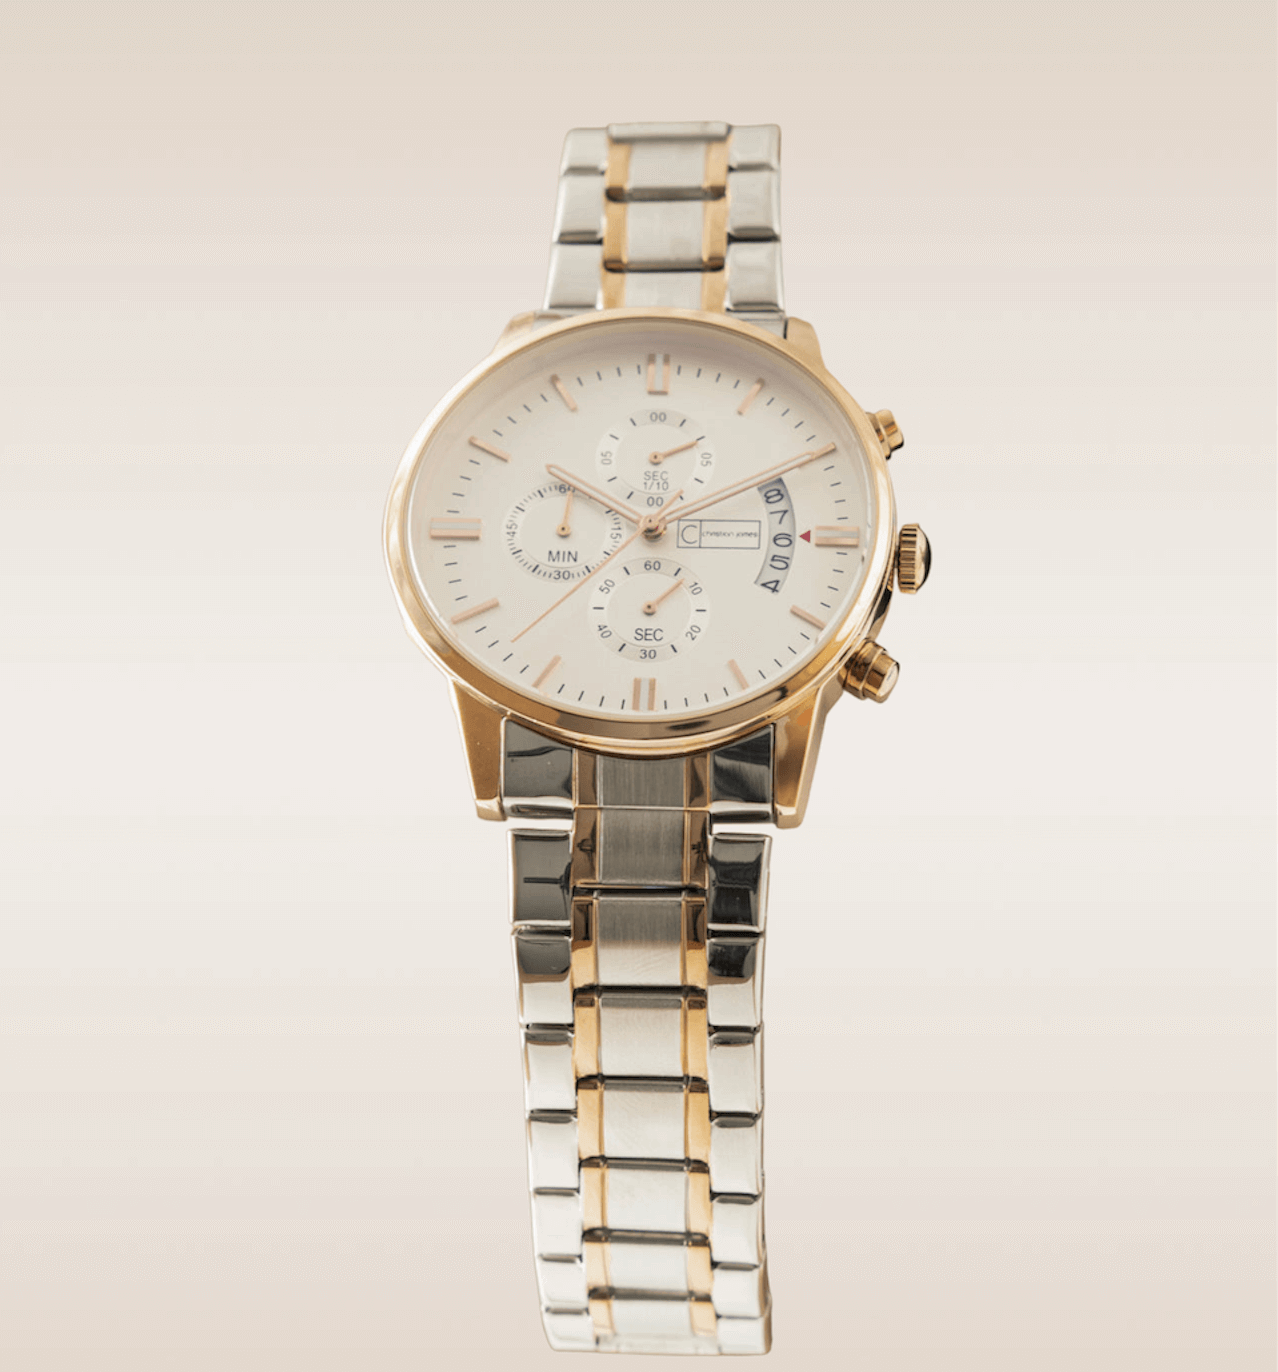 In this up-close shot, we are presented with the captivating Rose Gold Chariot Timepiece, an exquisite blend of elegance and luxury. The watch features a cream-colored watch face that exudes a sense of refined sophistication. The face is encased in shimmering rose gold, adding a touch of opulence and timeless beauty. The watch hands, also in rose gold, move gracefully across the face, marking the passage of time with precision. Complimenting the golden accents, the band is crafted with a silver link design, which adds a touch of modernity and versatility. Strikingly, a strip of gold runs through the center of the band, seamlessly blending the elements of silver and gold. 